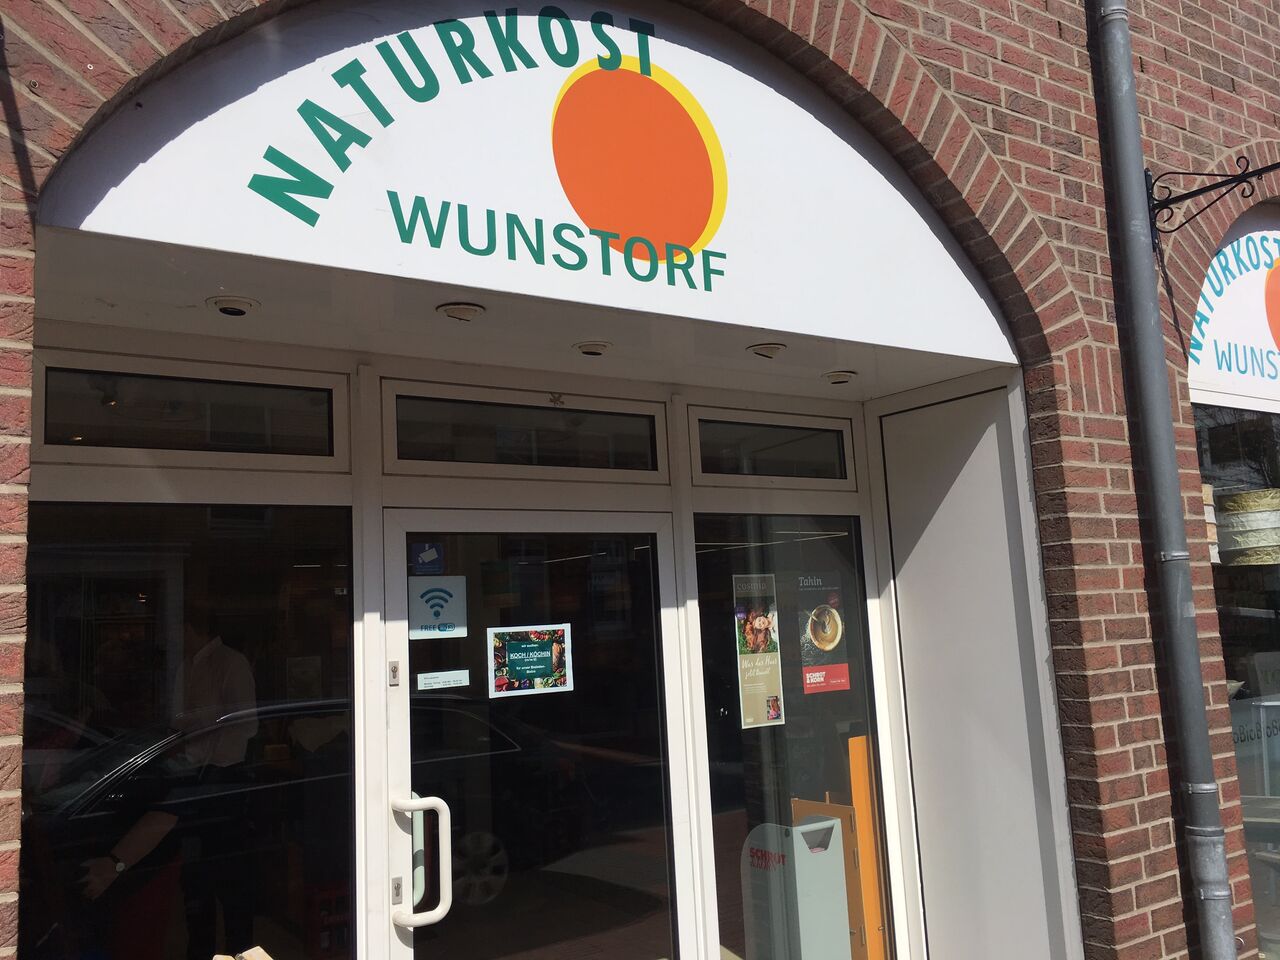 A photo of Naturkost, Wunstorf